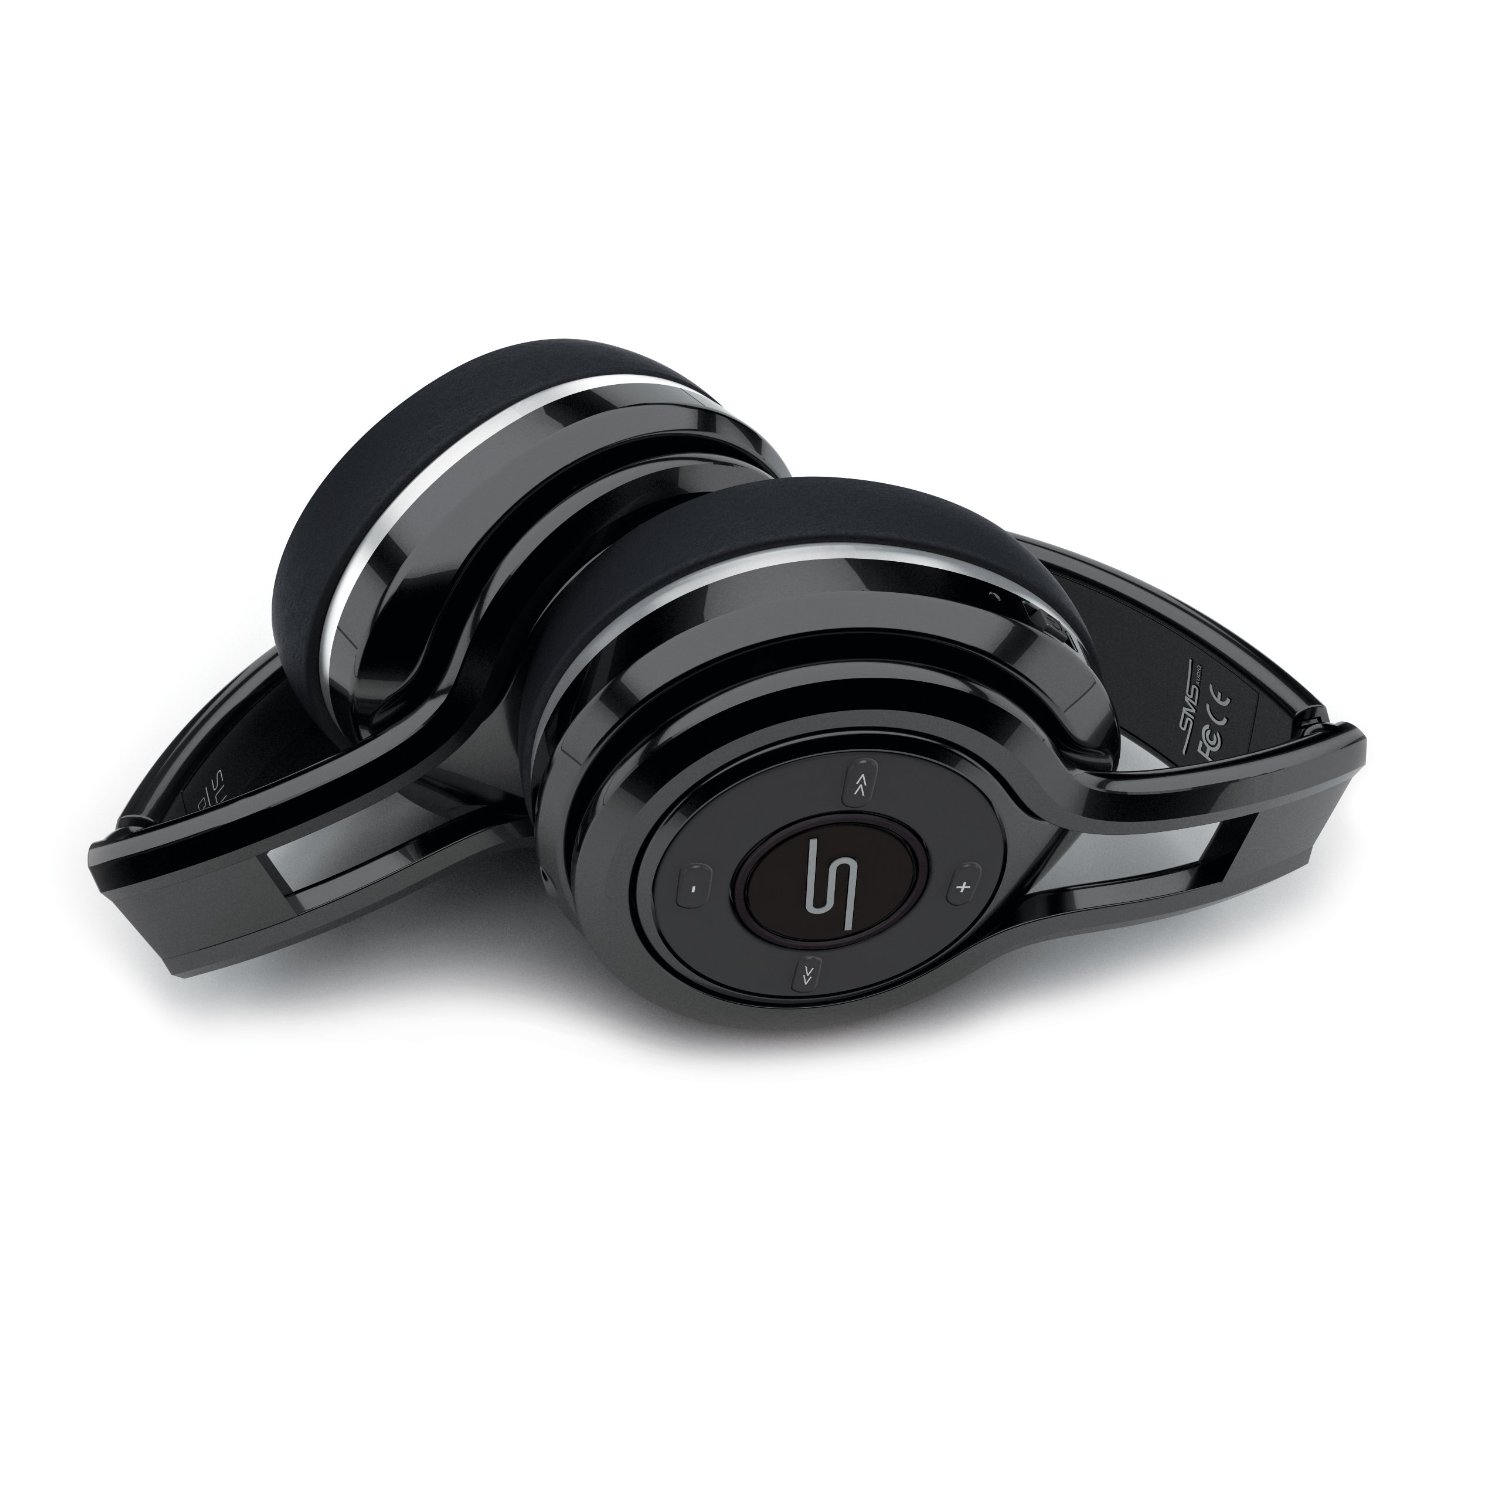 SMS Audio SYNC by 50 folded